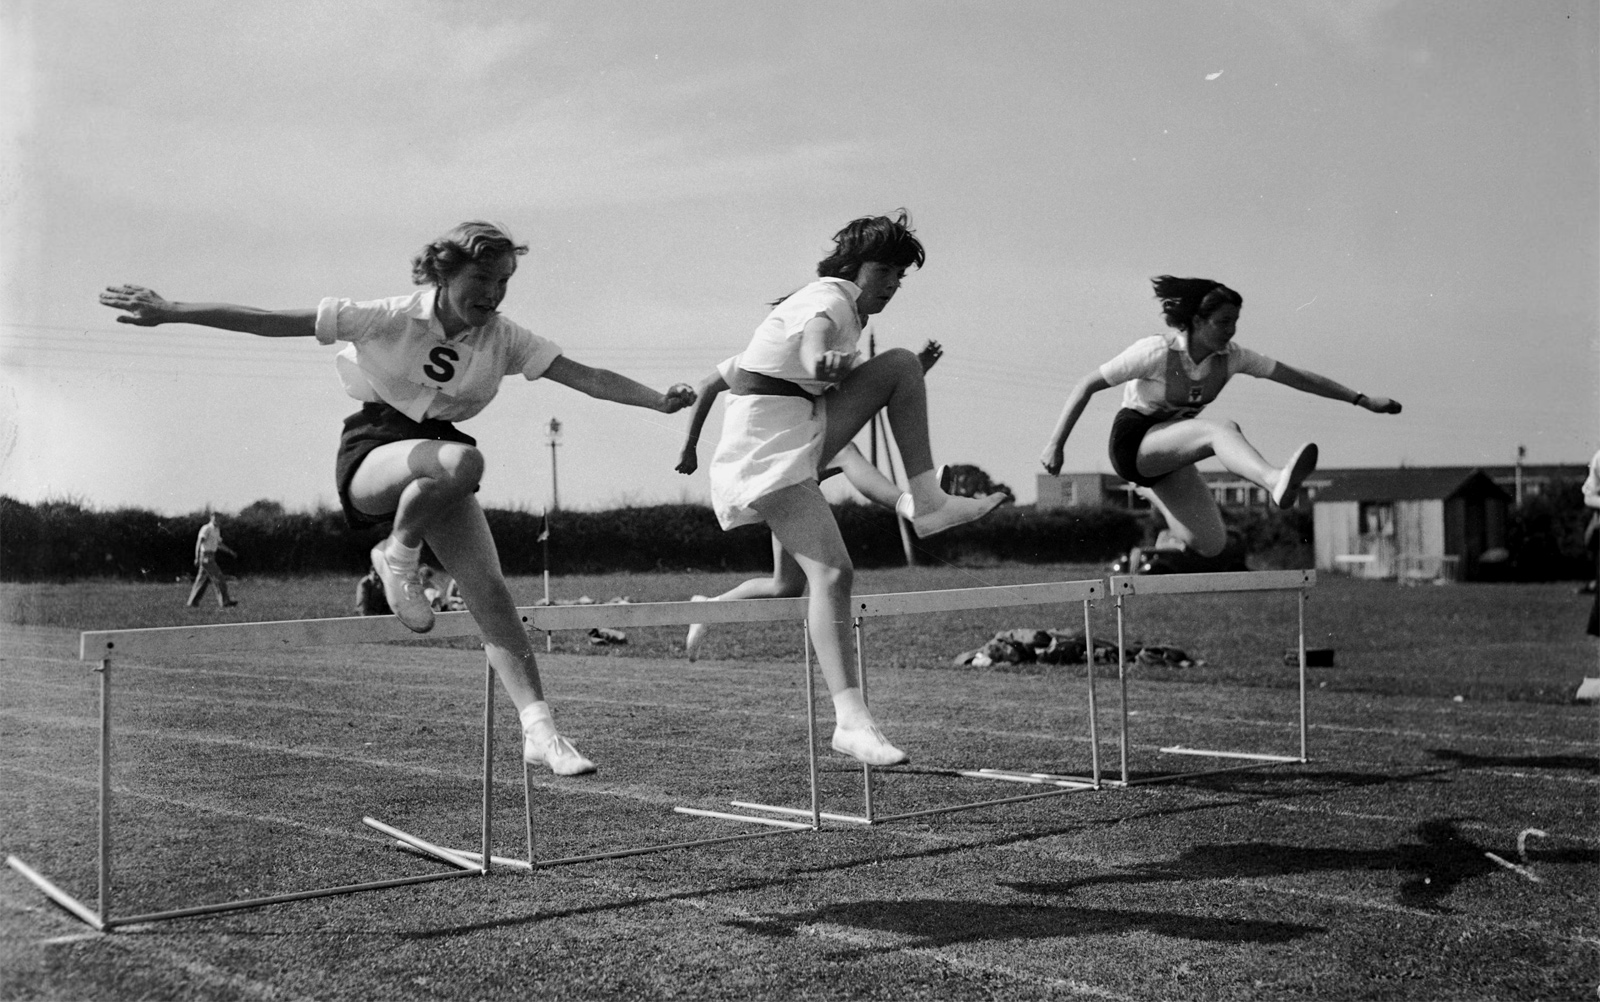 Hurdles race at Shrewsbury, 1953 | Geoff Charles, The National Library of Wales | CC BY-NC-ND 2.0